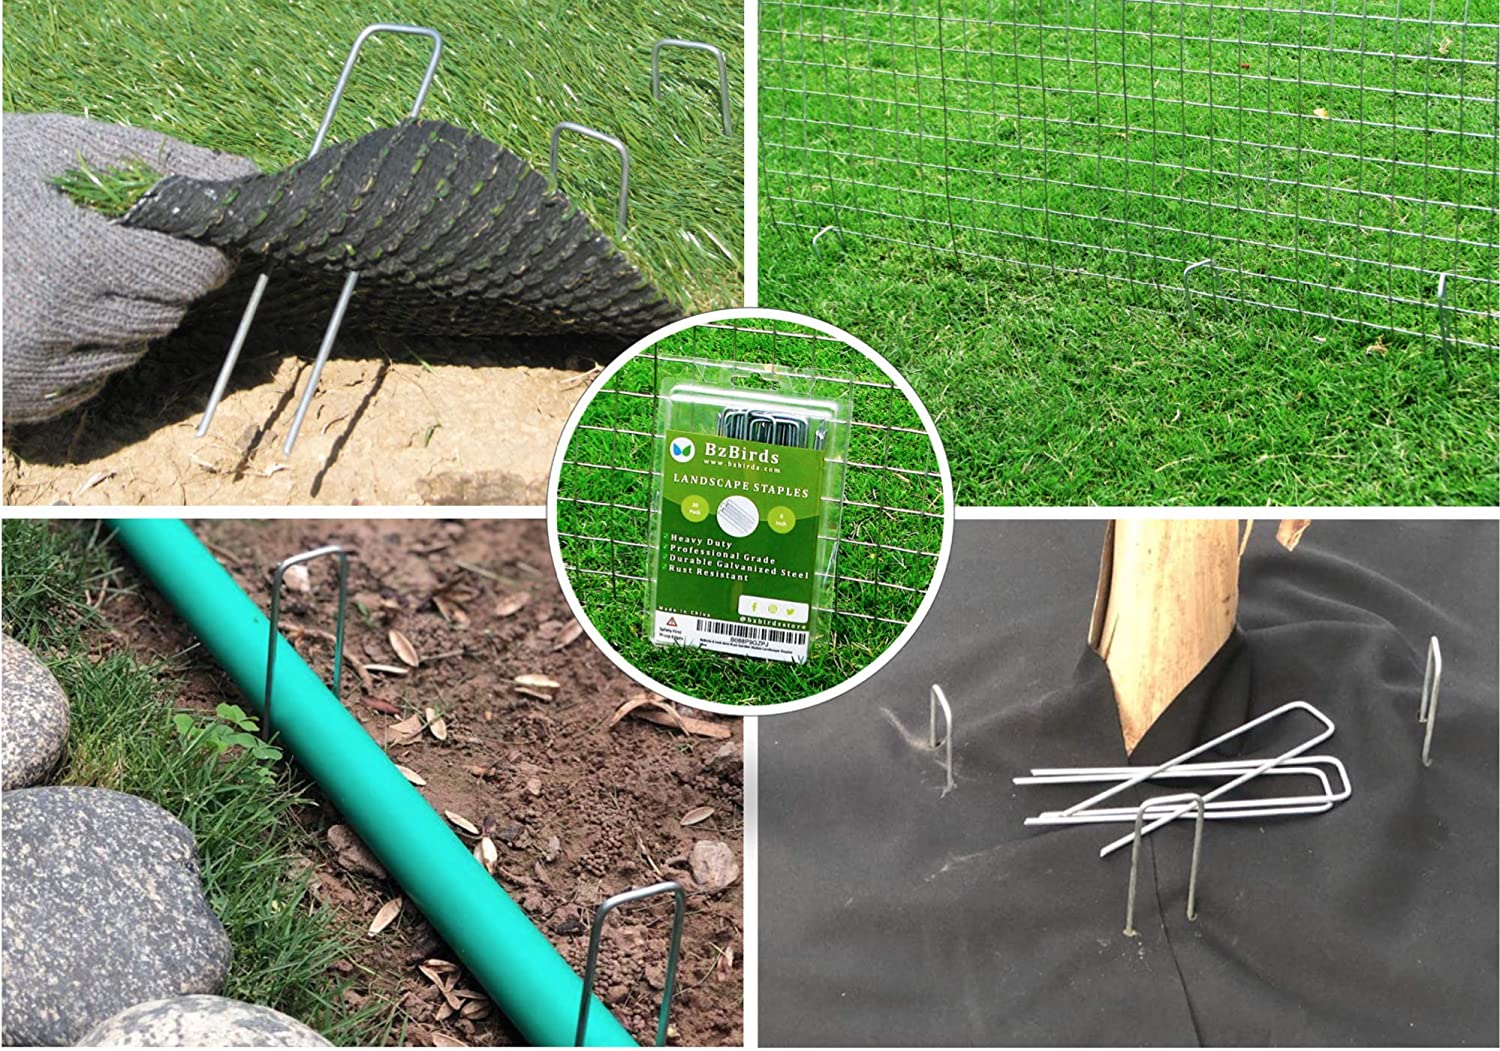 Dog Fence Lawn 100 Pack 11 Gauge Sturdy Rust Resistant Gardening Supplies Garden Staple for Install Artificial Grass ZGR Galvanized Landscape Staples 6 Inch Securing Ground Cover Soaker Hose 